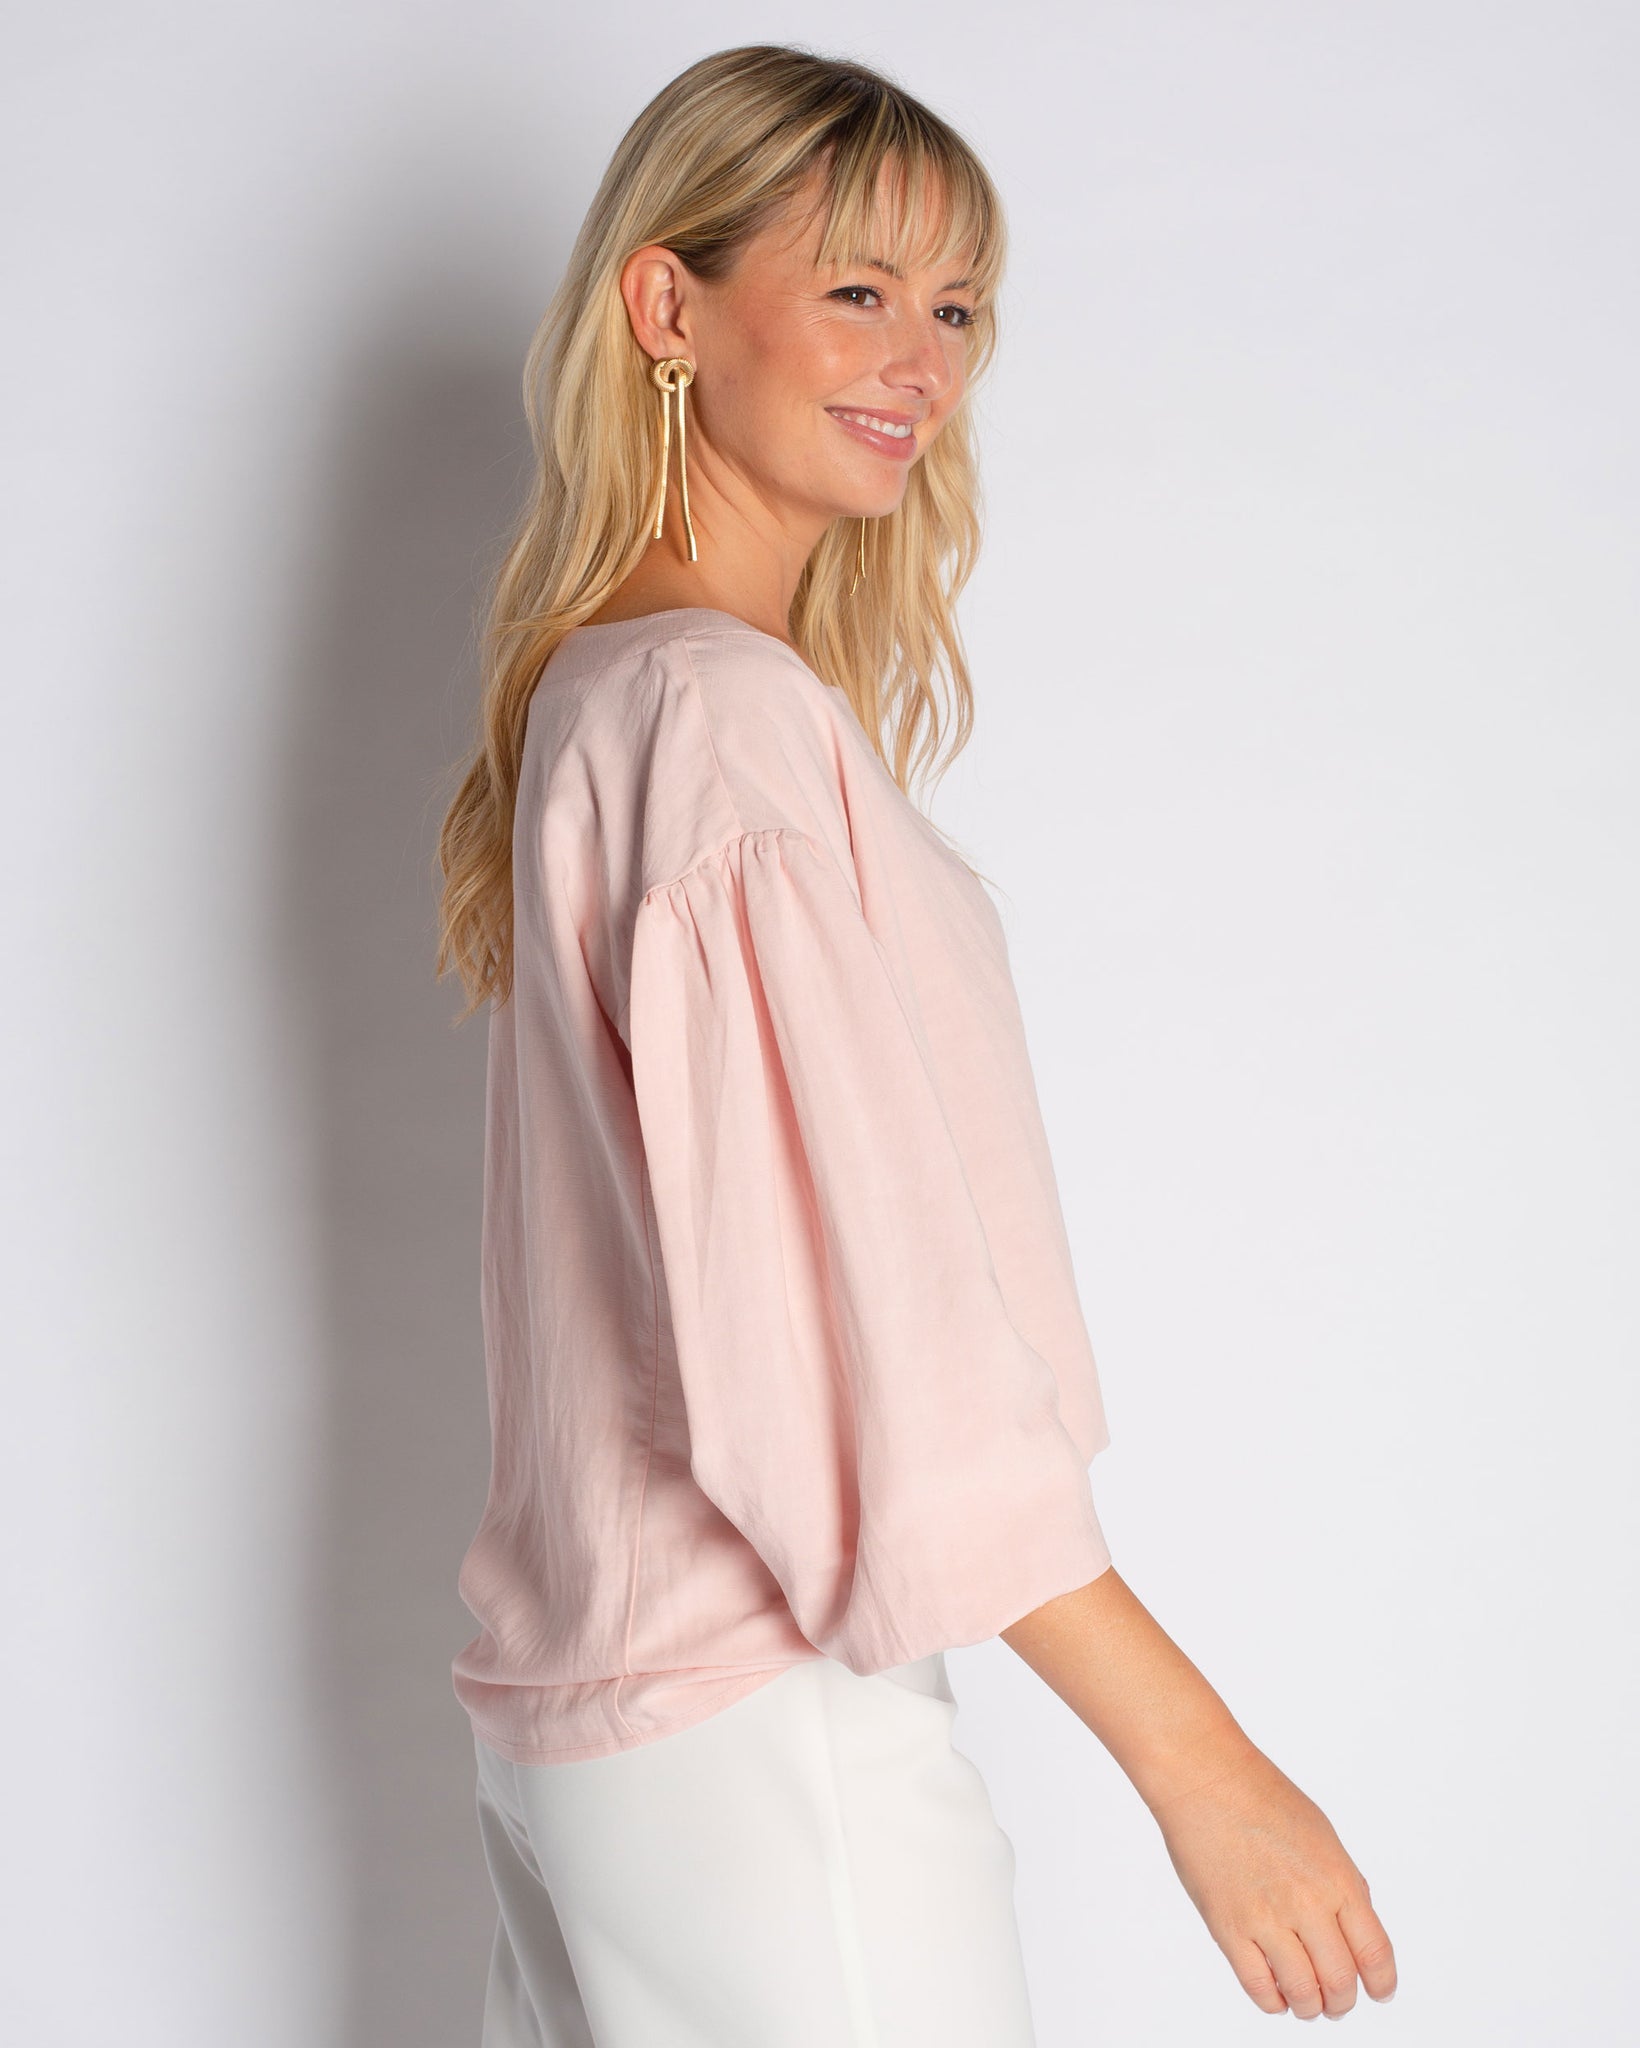 The Jewel Blouse in Linen- SALE